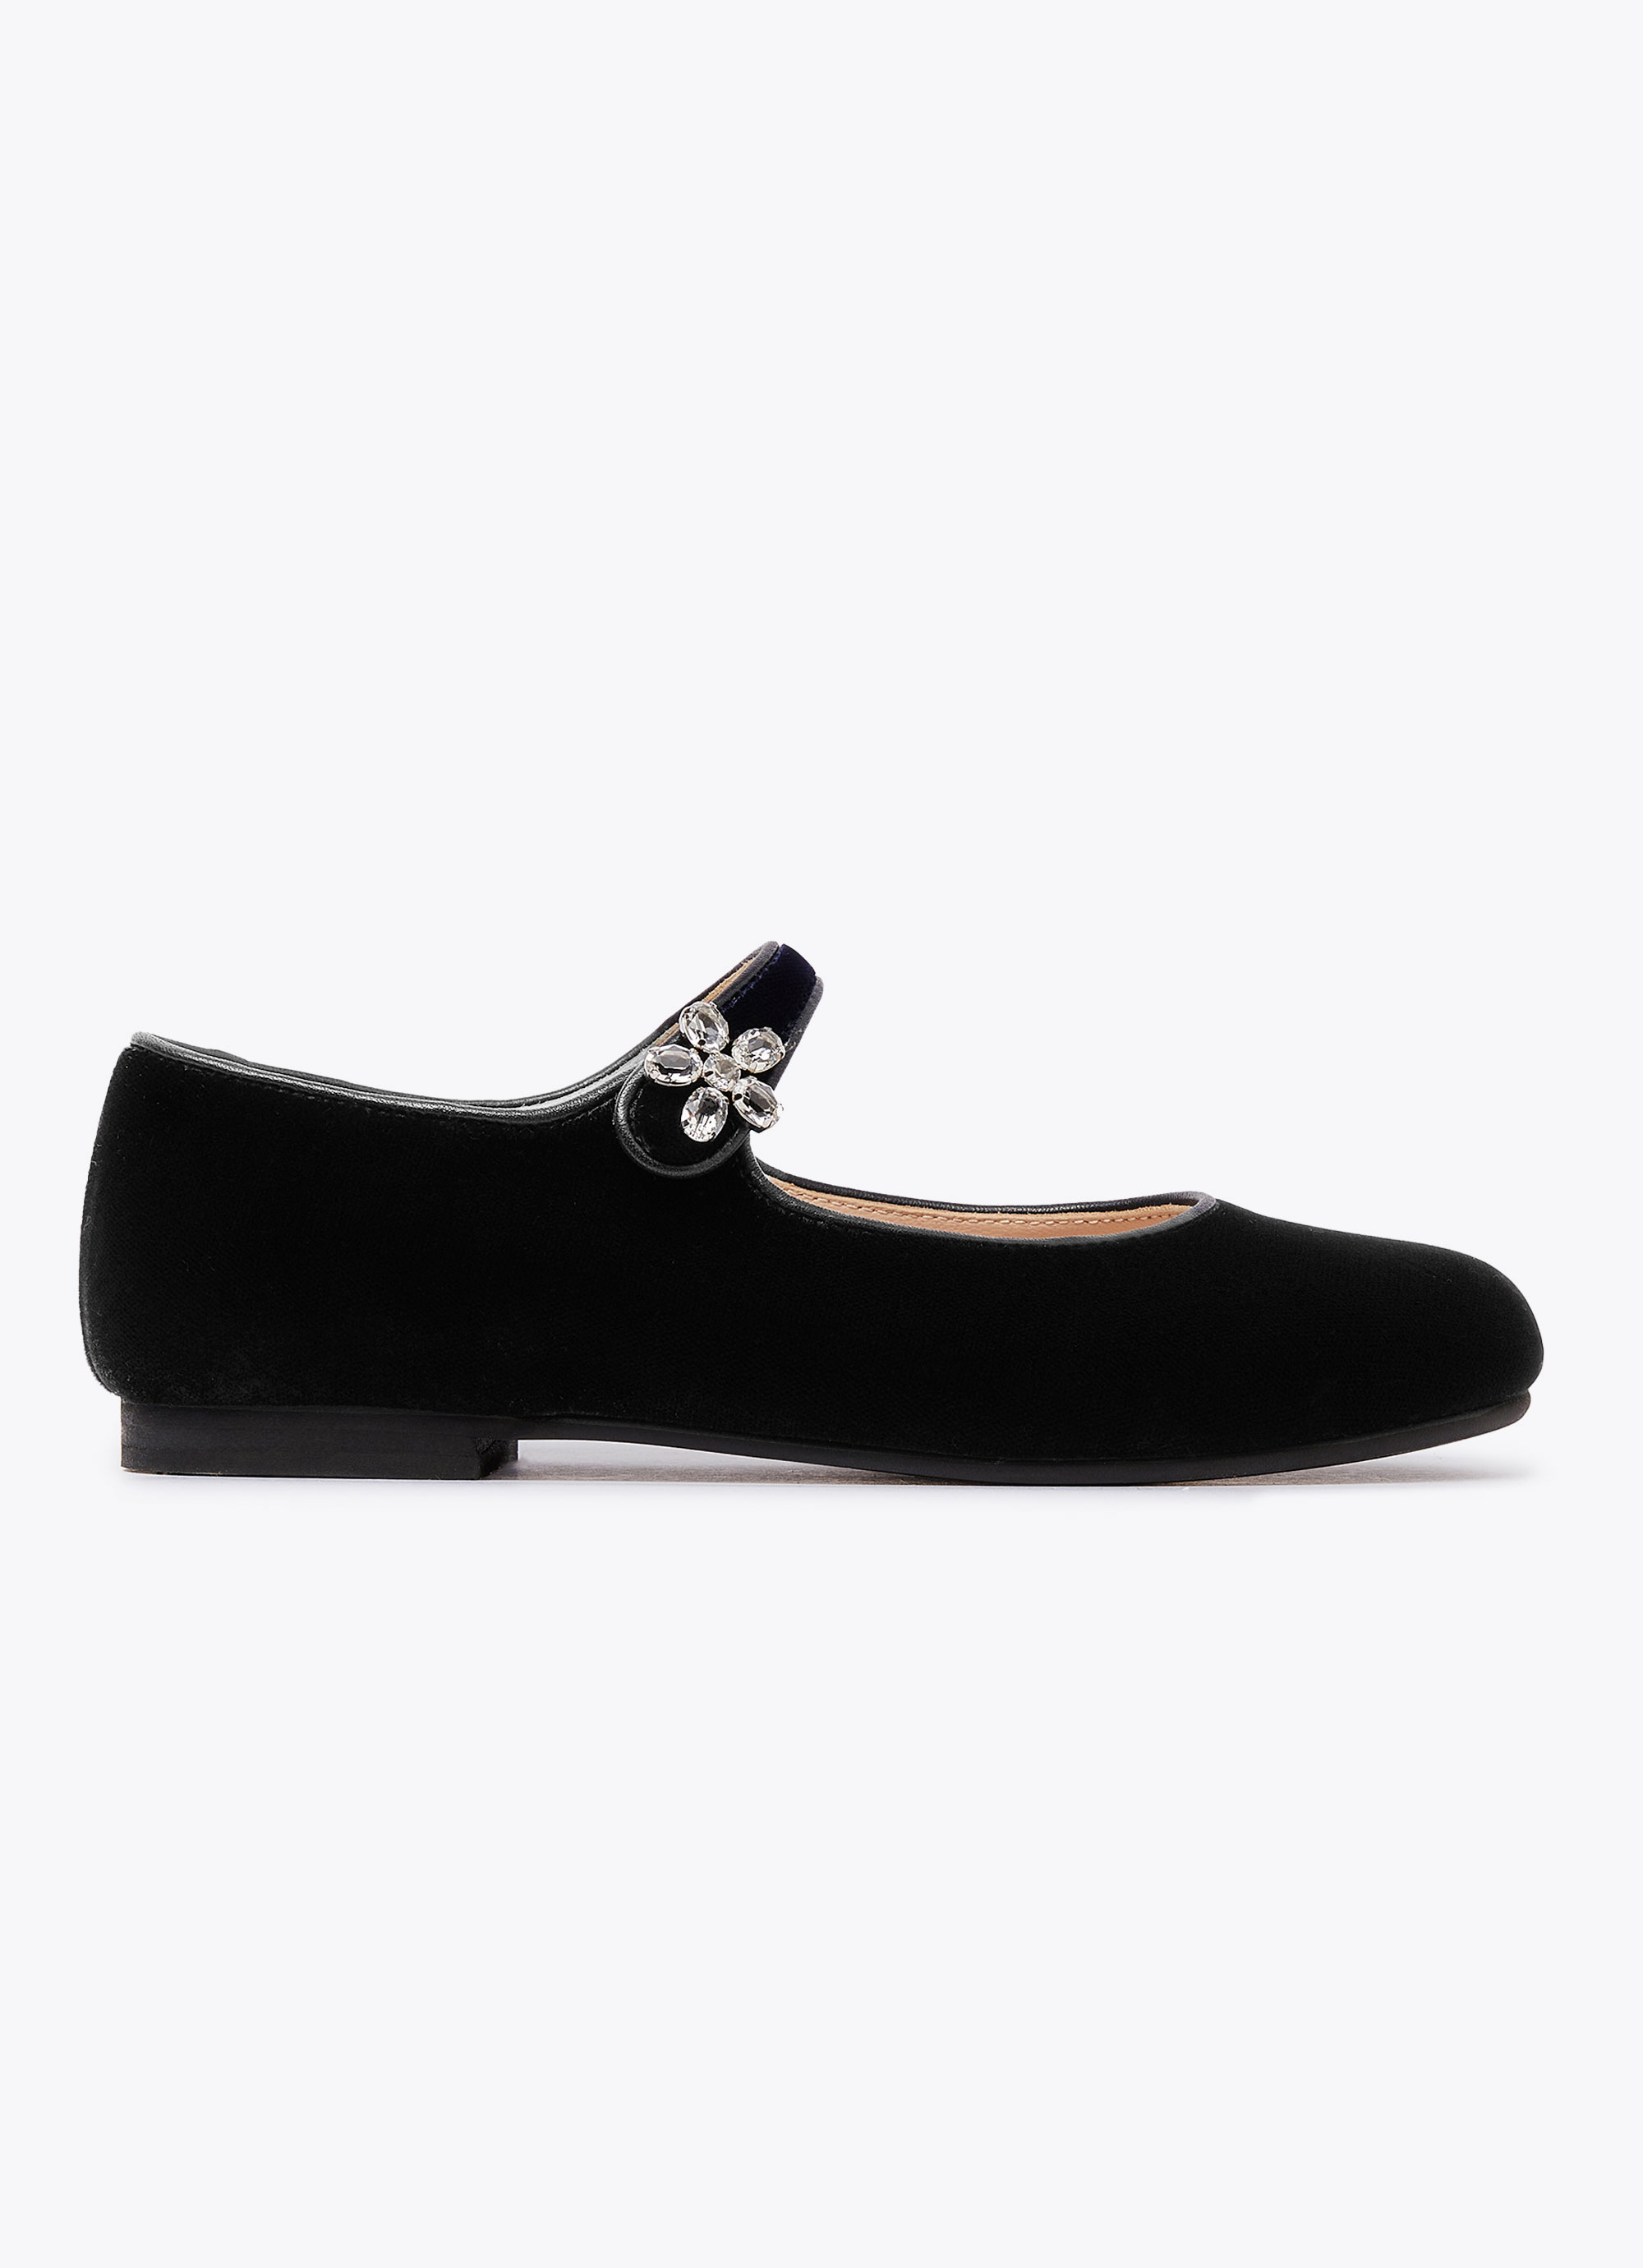 Black velvet ballet flats with crystals - Shoes - Il Gufo